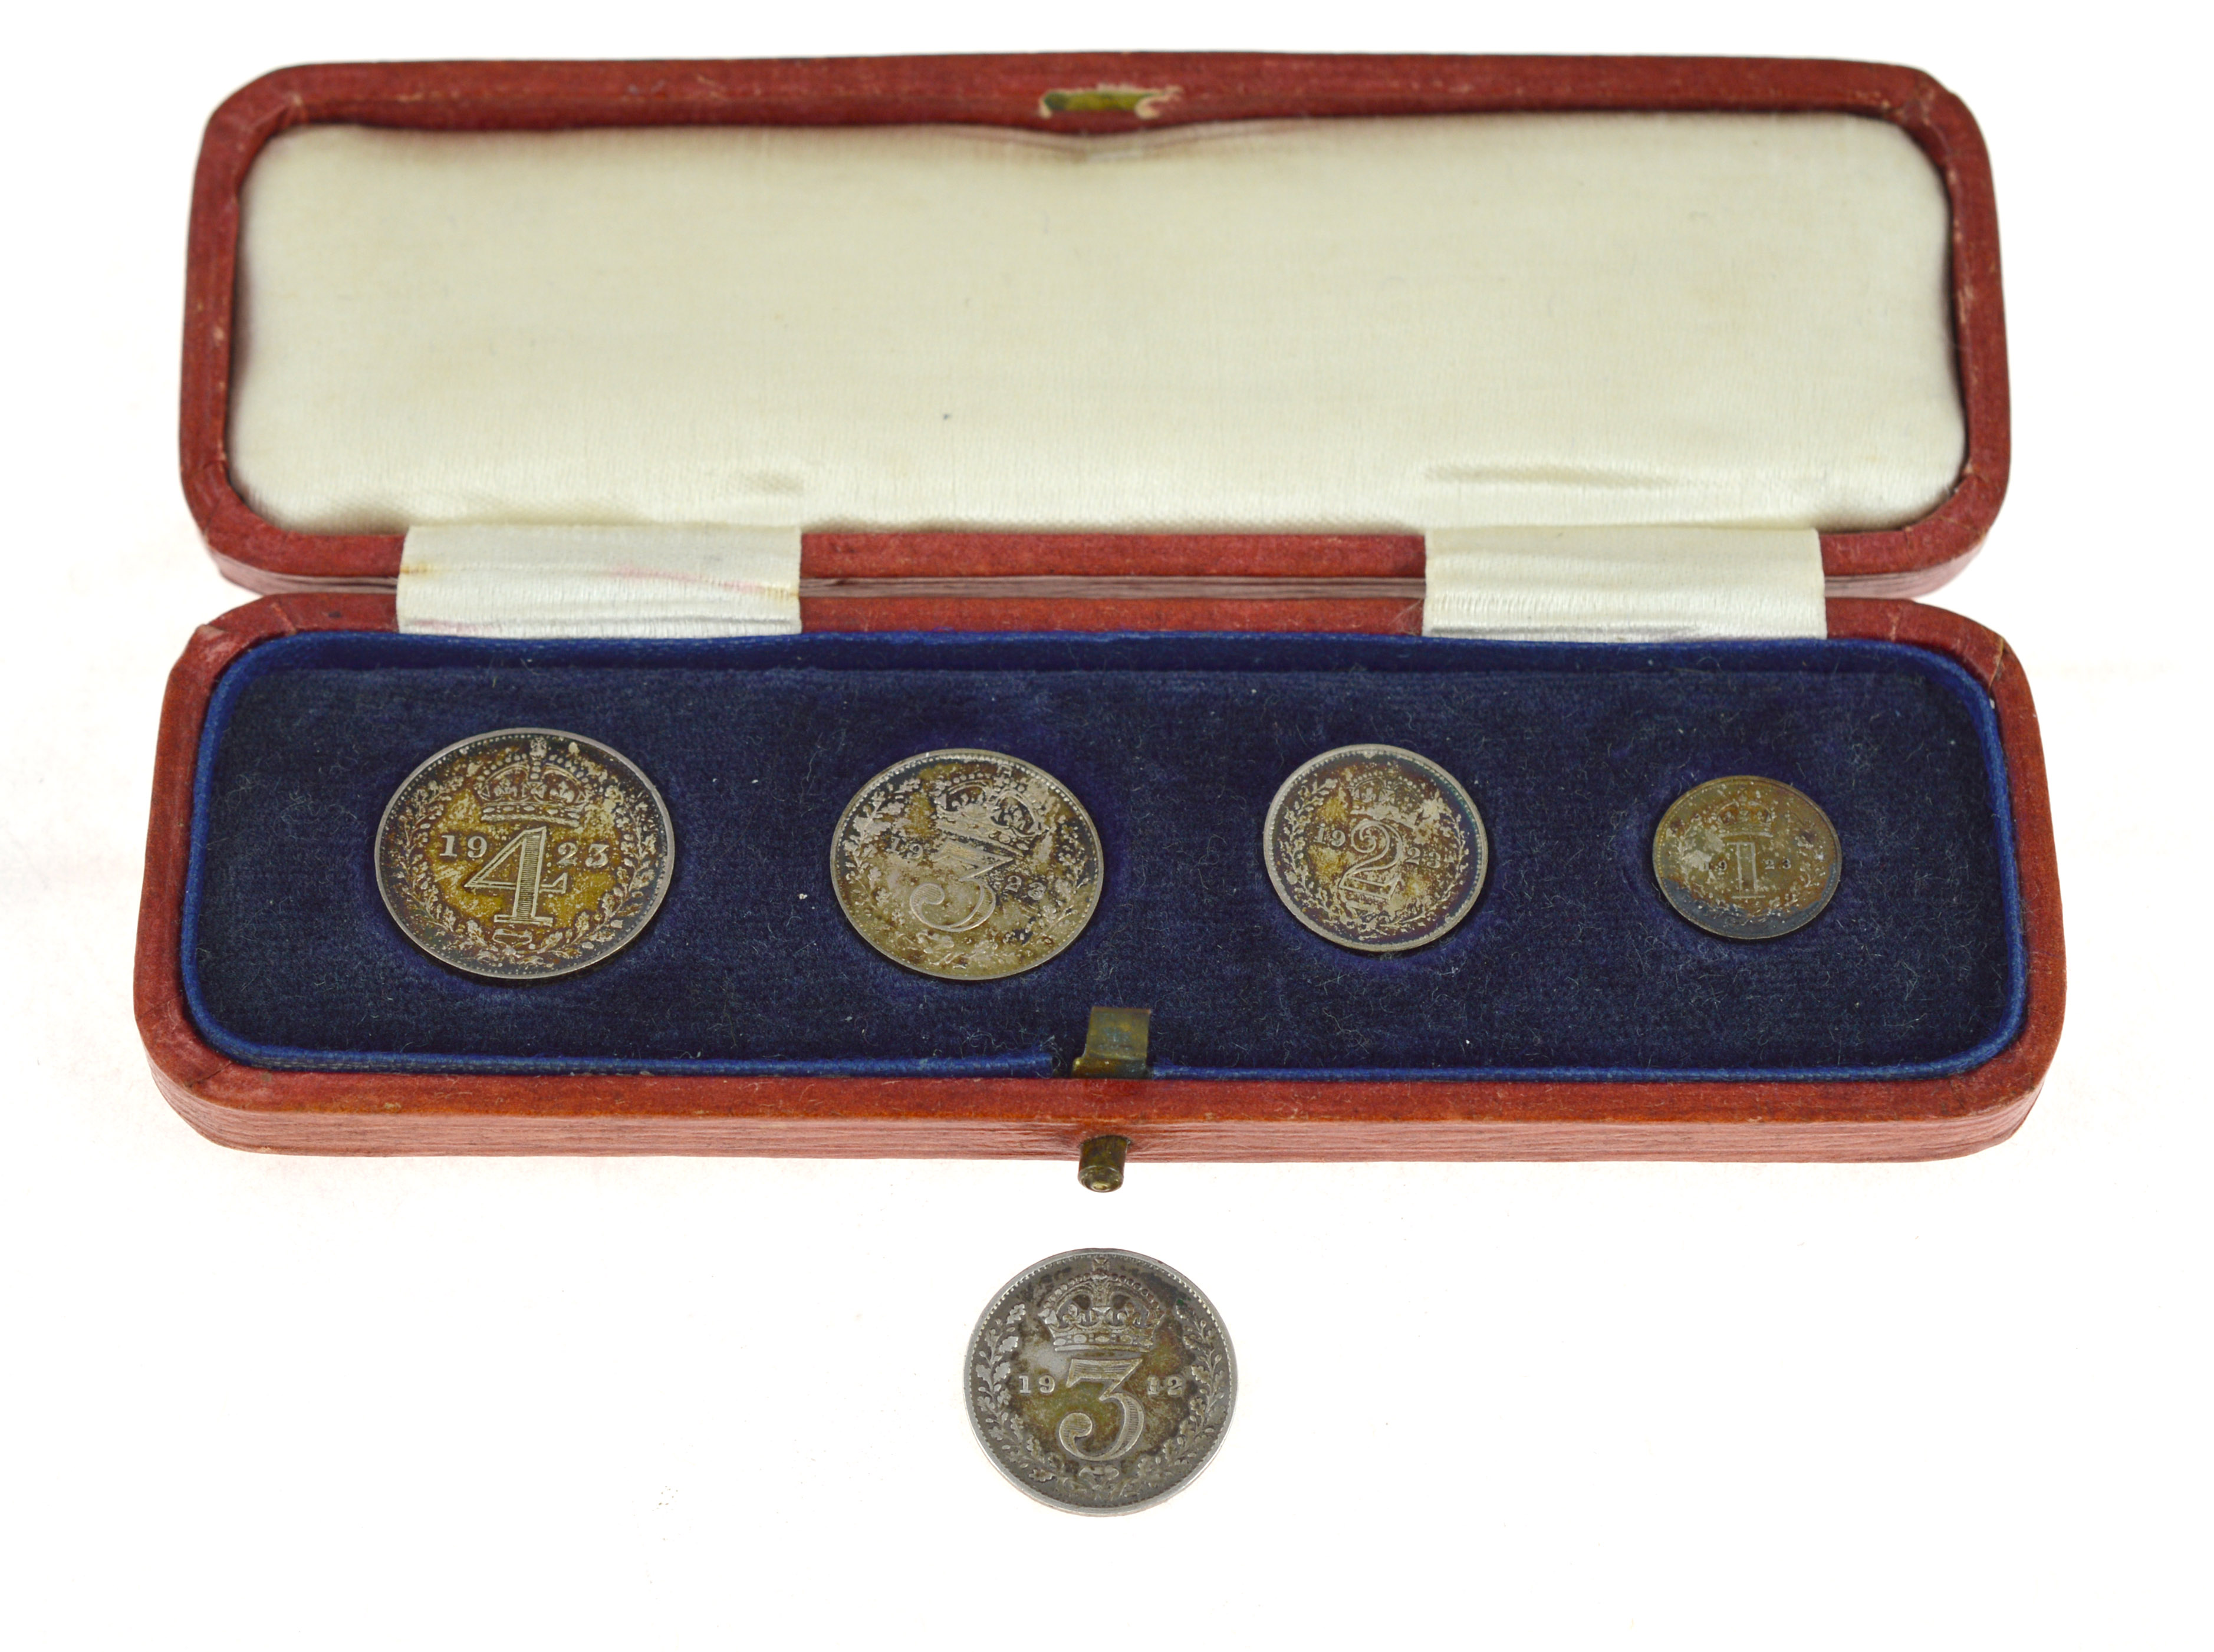 A 1923 Maundy complete silver coin set, in original fitted leather box together with a single 1912